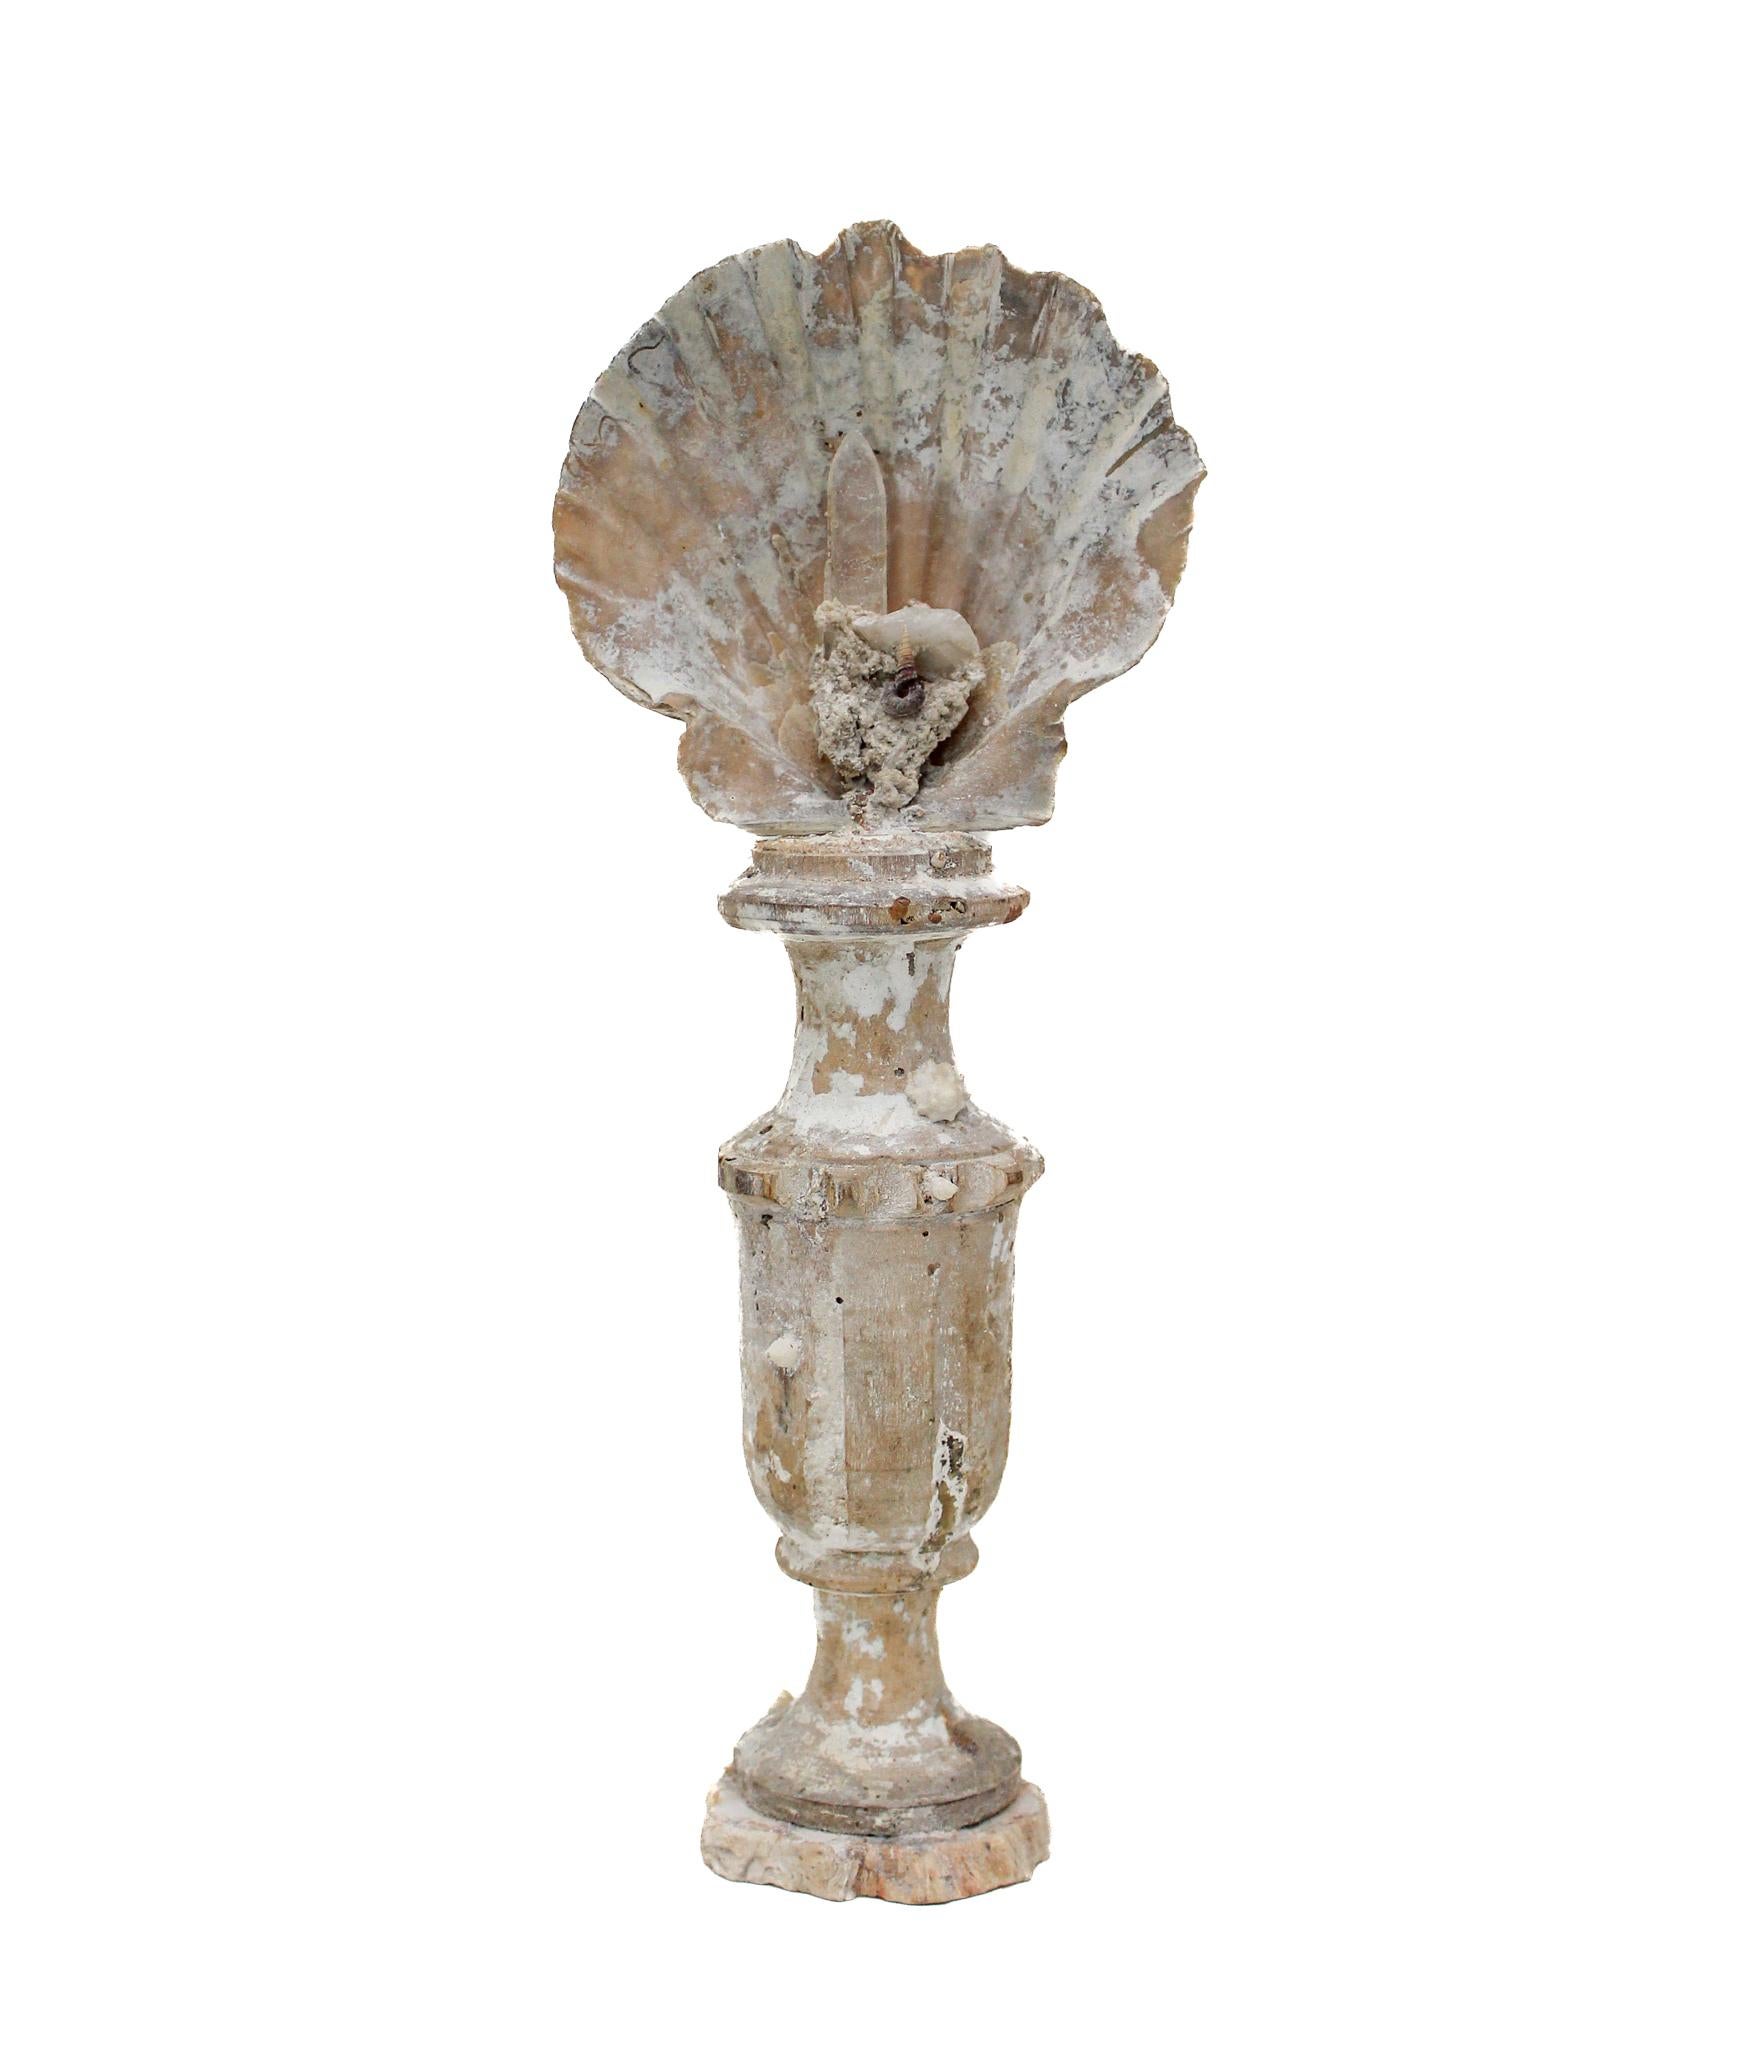 17th century Italian vase with a chesapecten shell, crystal point, and fossil shells on a petrified wood base.

This fragment is from a church in Florence. It was found and saved from the historic flooding of the Arno River in 1966.

The piece has